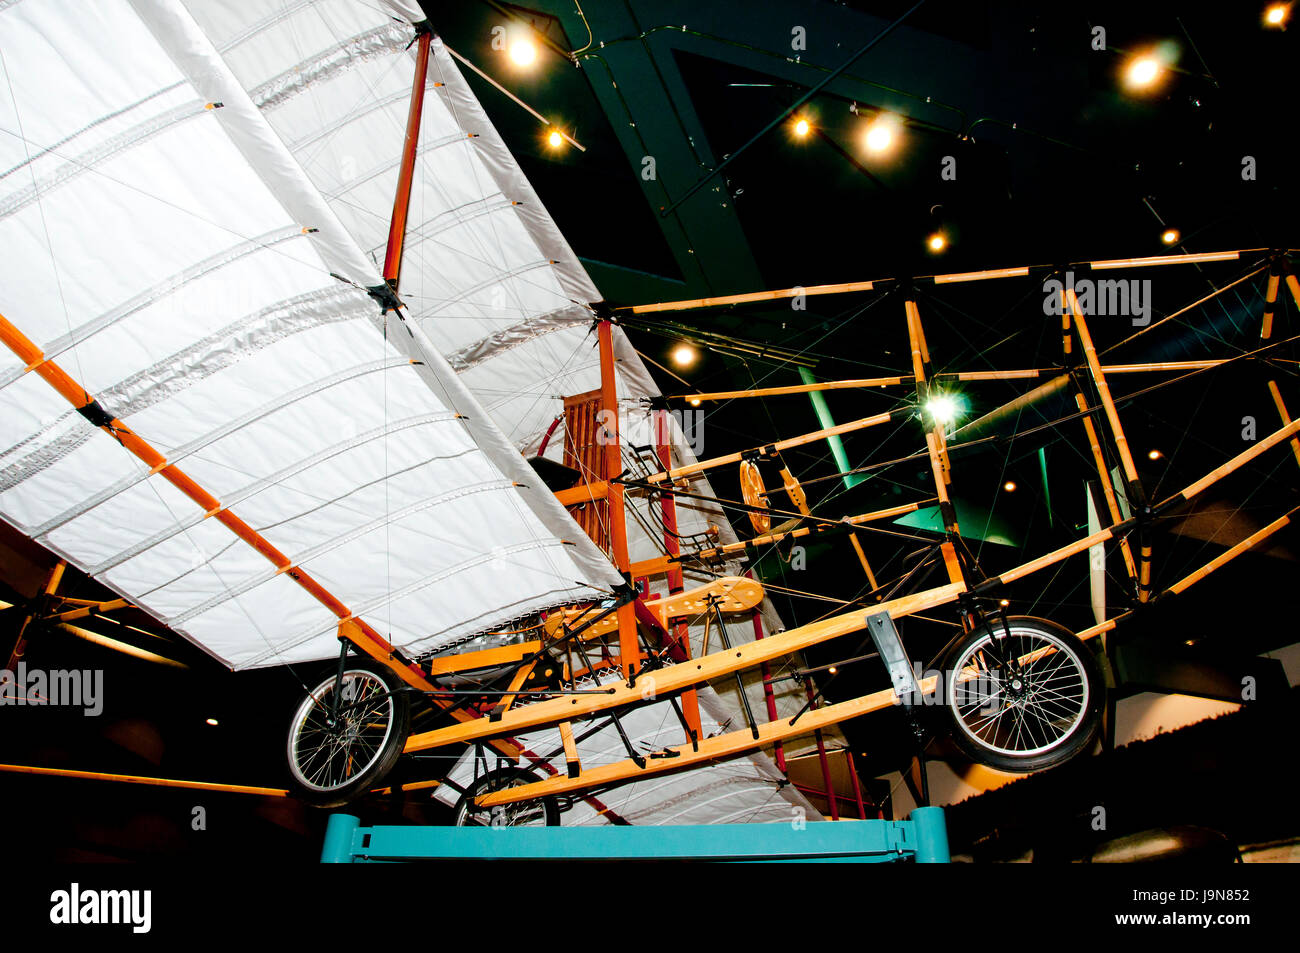 BADDECK, CANADA - August 13, 2016:  Replica of Silver Dart; the first powered aircraft in Canada displayed in the Alexander Graham Bell National Histo Stock Photo